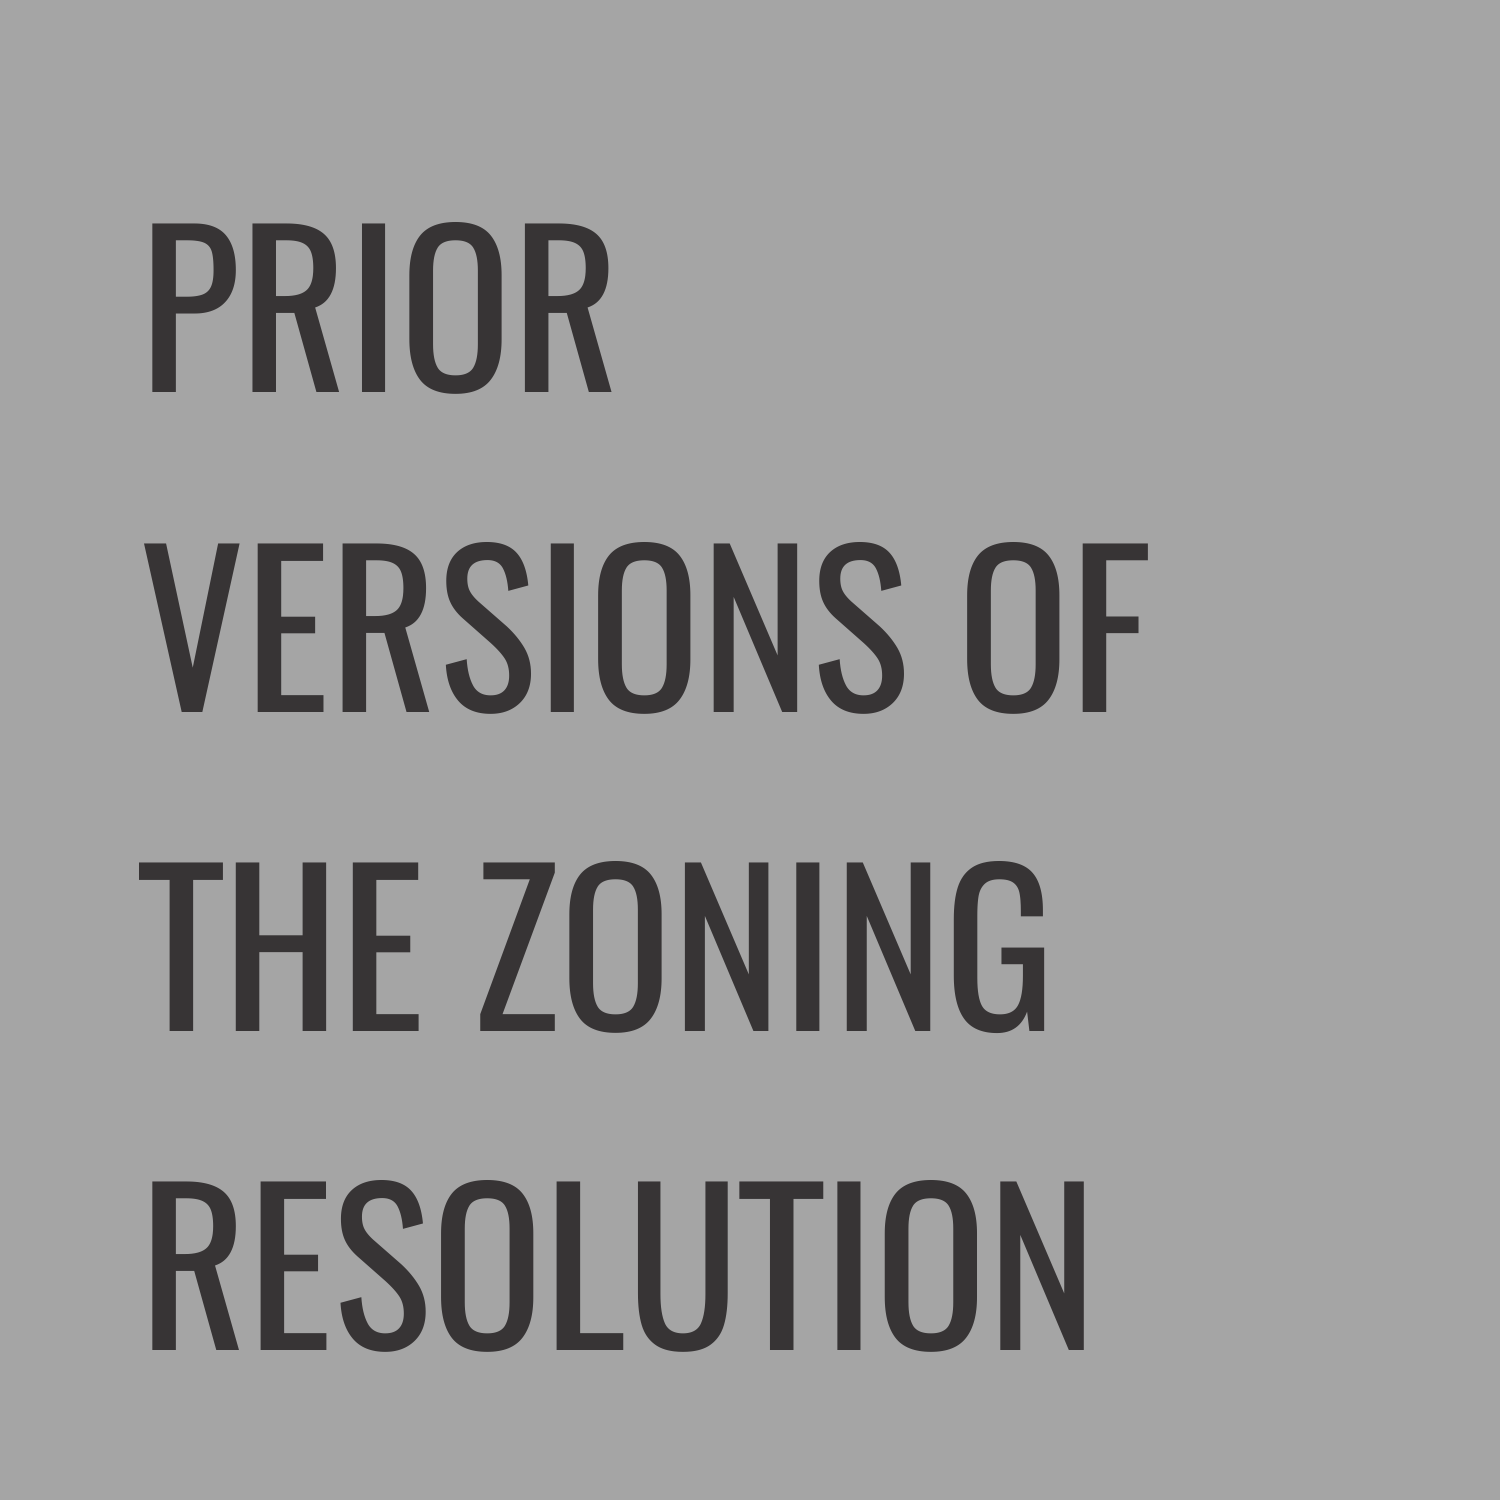 Prior Versions of the Zoning Resolution